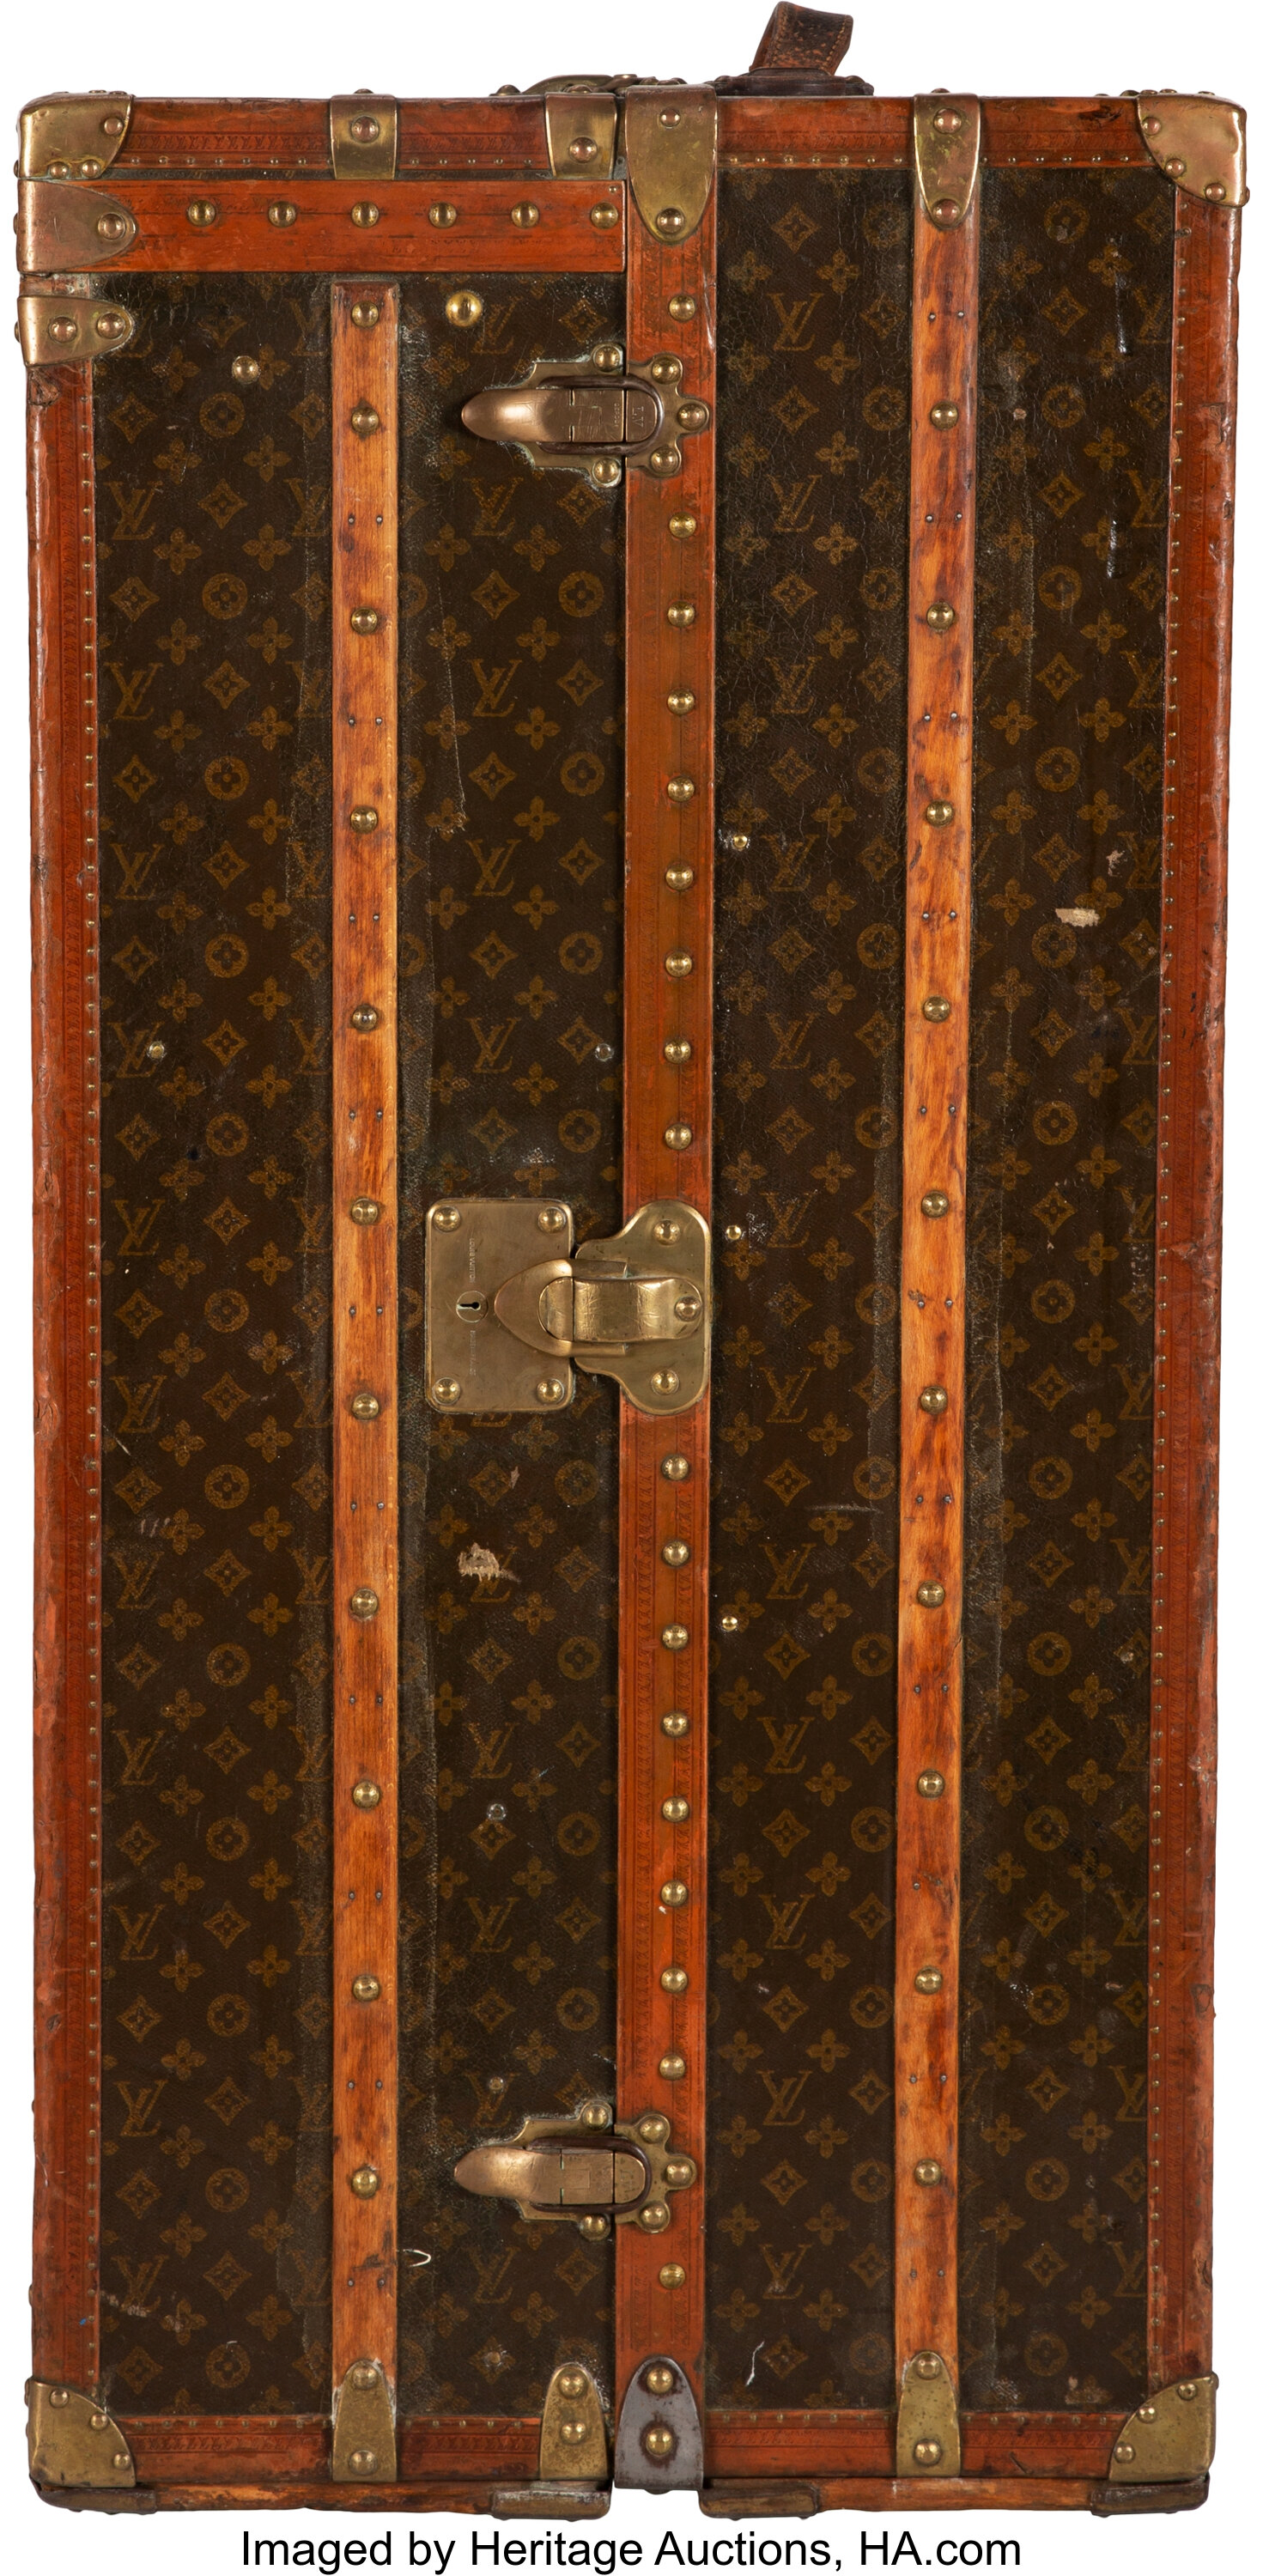 Sold at Auction: Louis Vuitton, Early 20th c. Louis Vuitton Monogram  Steamer Trunk